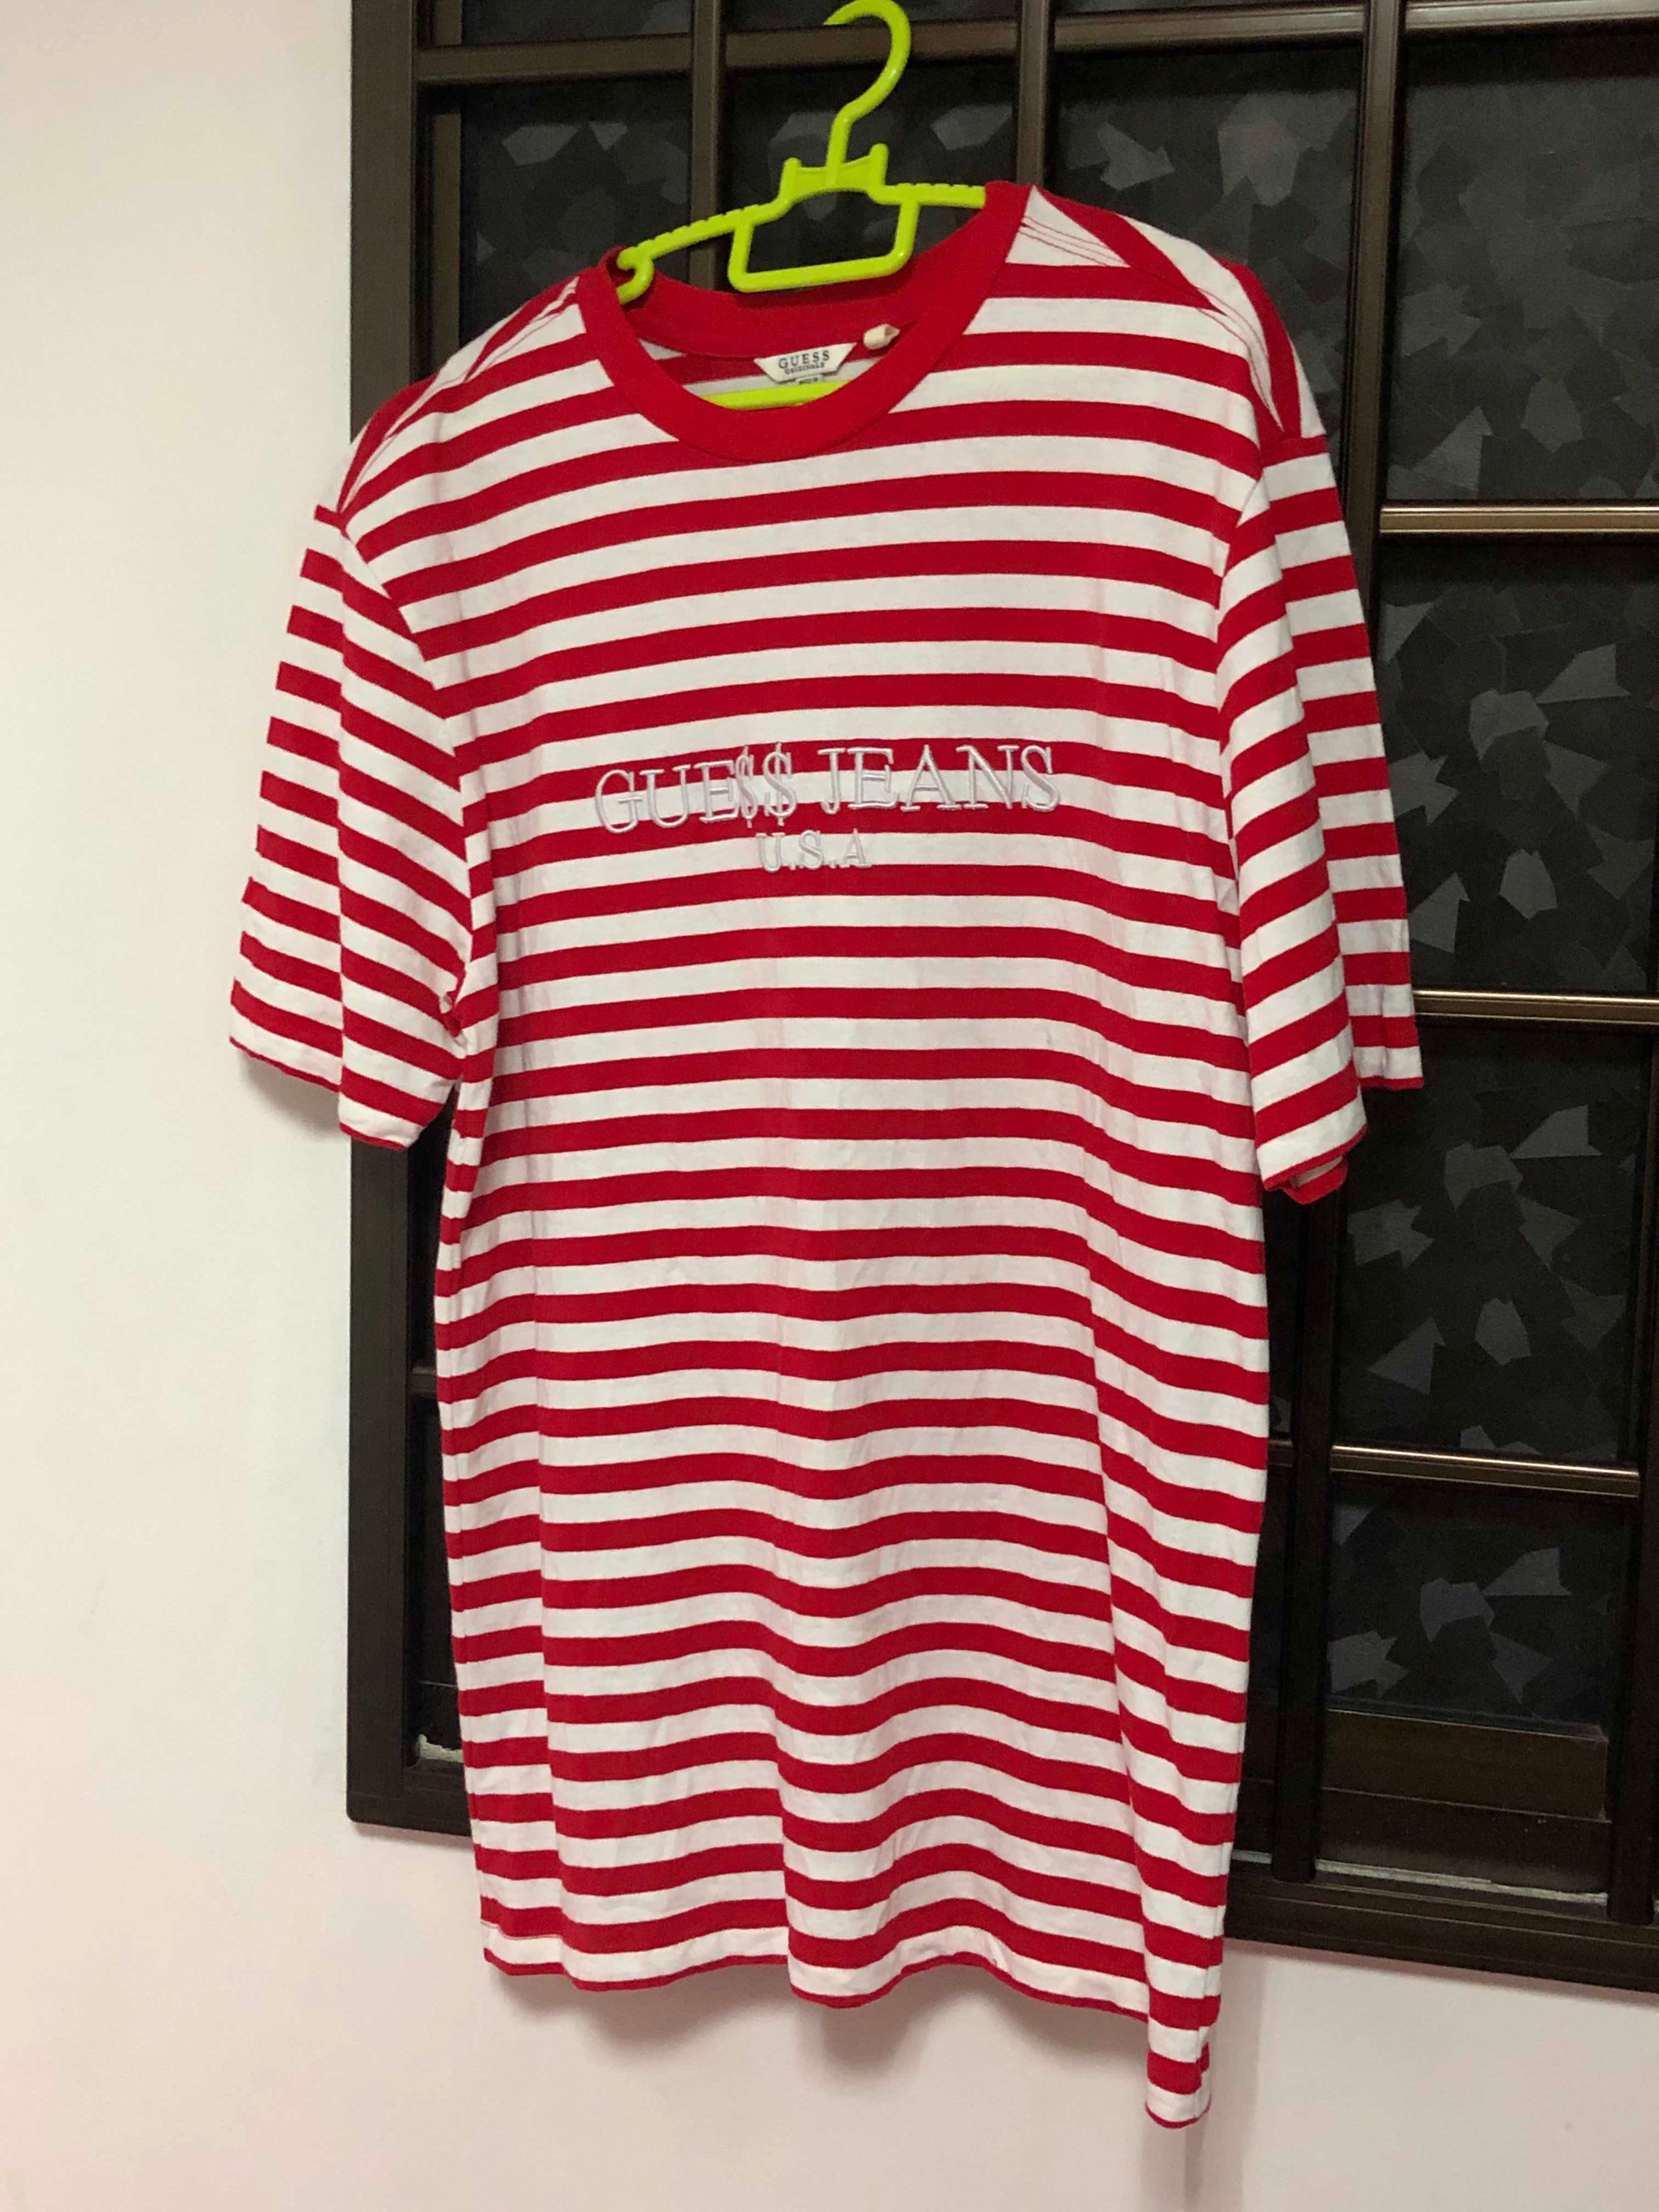 GUESS ASAP ROCKY RED WHITE TEE, Men's Fashion, & Sets, Tshirts & Polo Shirts on Carousell